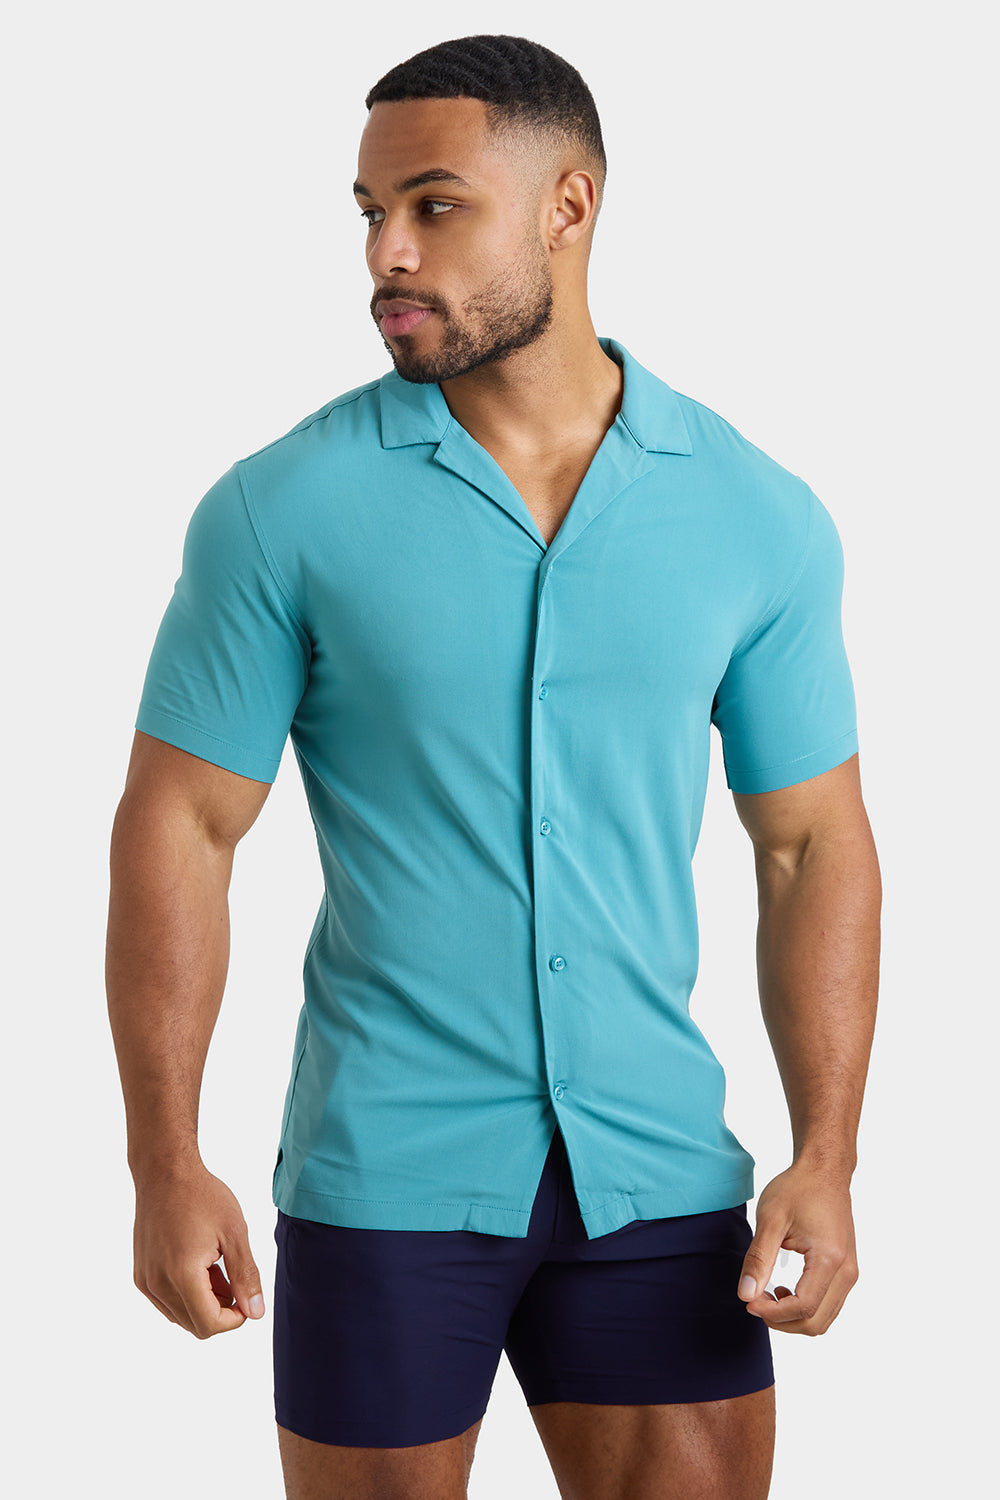 Athletic Fit Short Sleeve Viscose Shirt in Teal